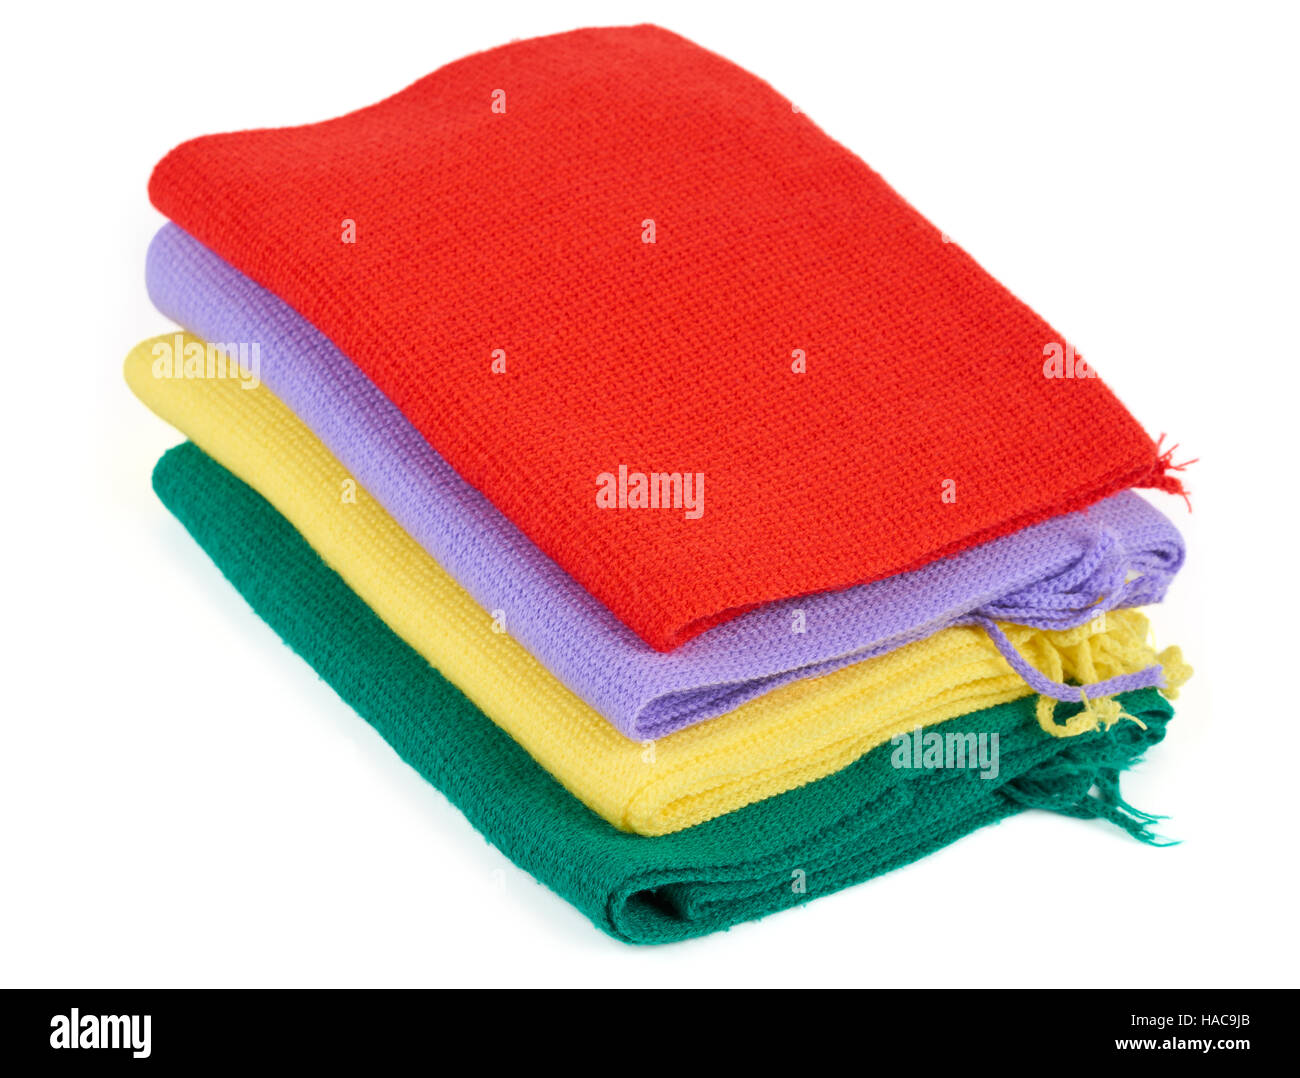 Red, violet, yellow and green scarves isolated on white Stock Photo